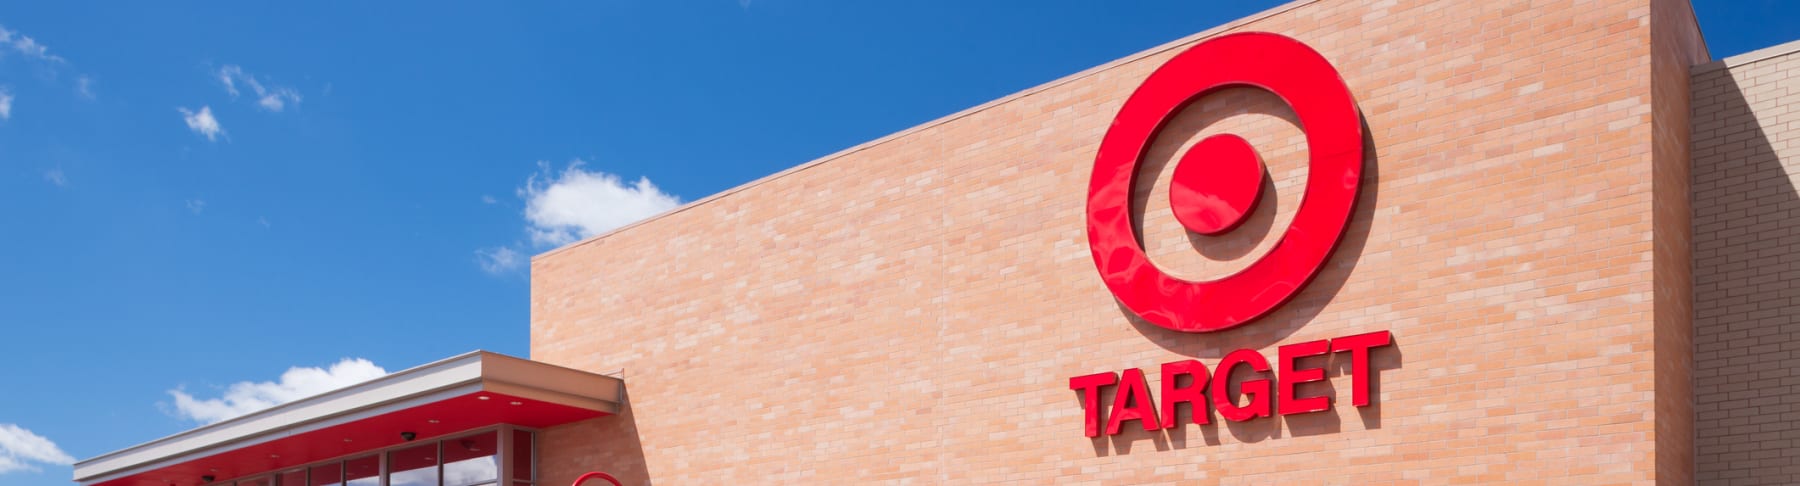 Exterior of Target store.